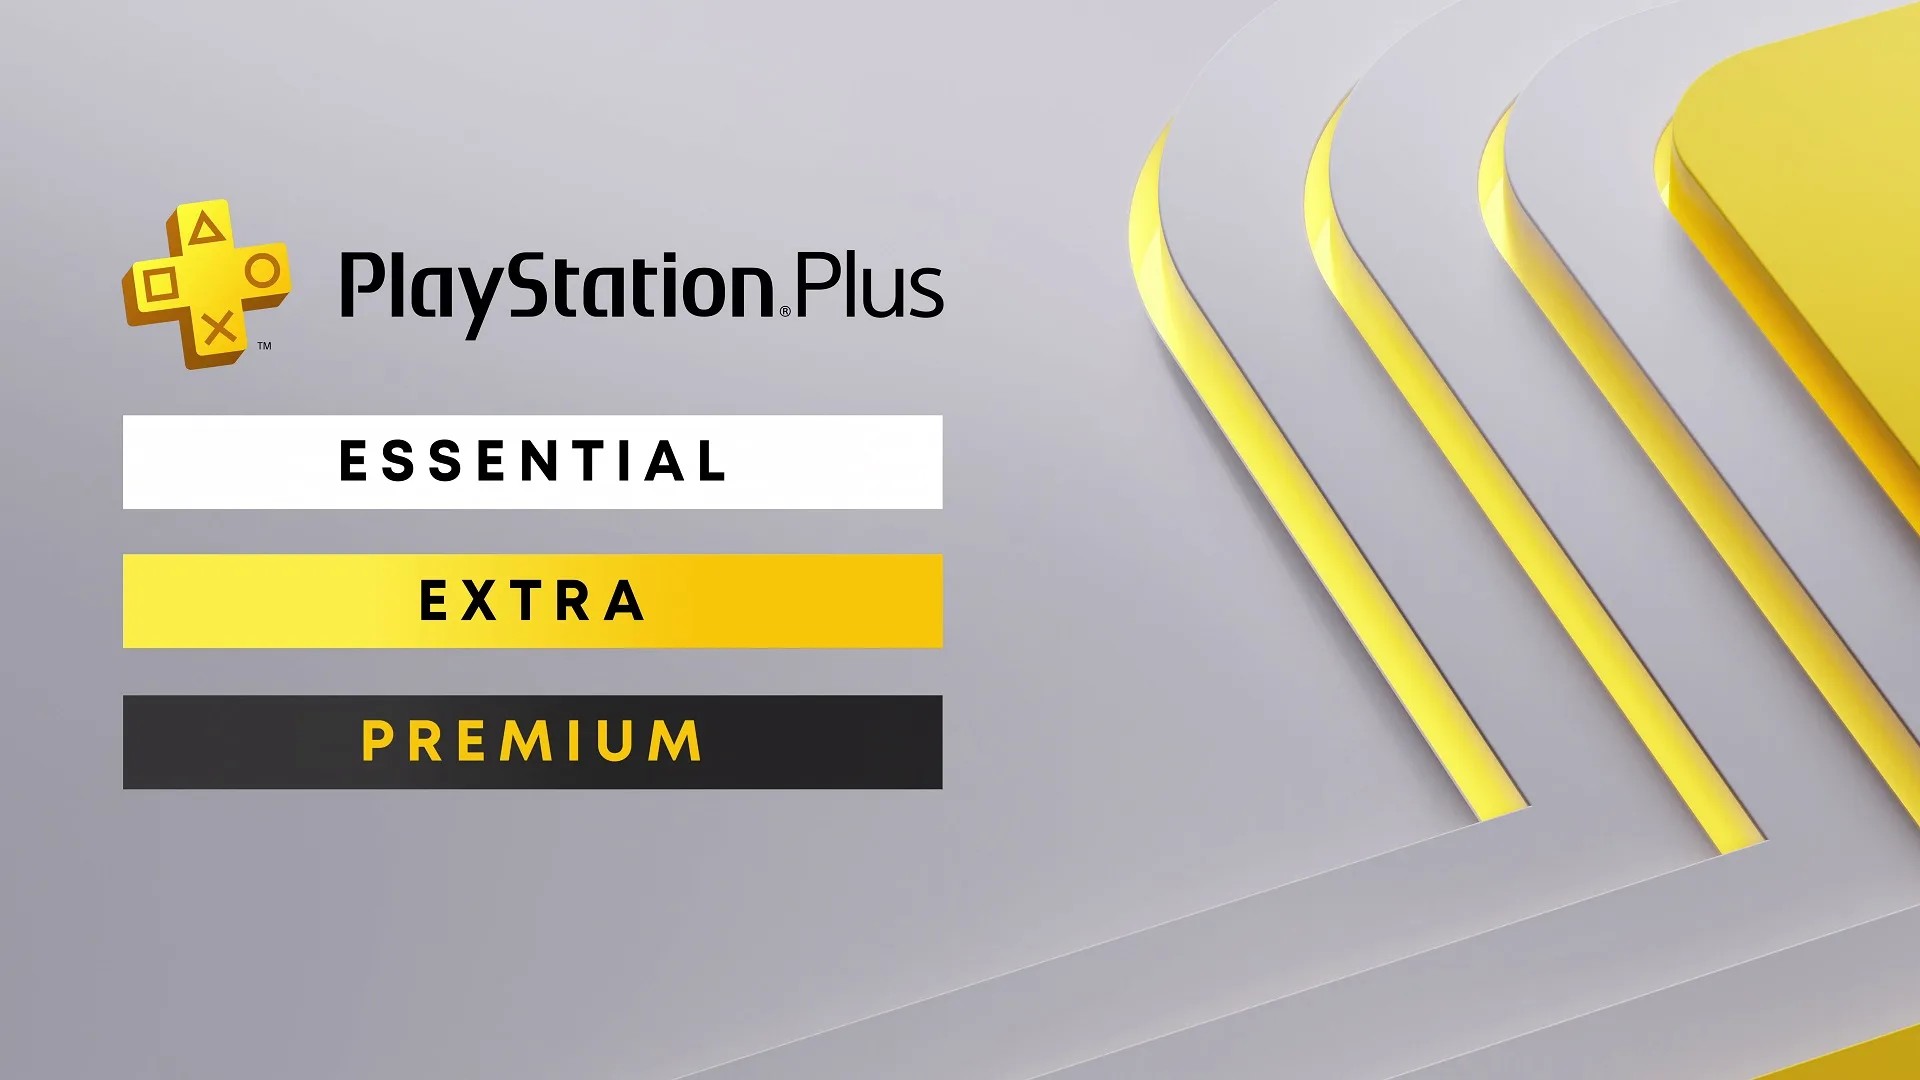 PS Plus memberships could be available globally across all platforms in the future